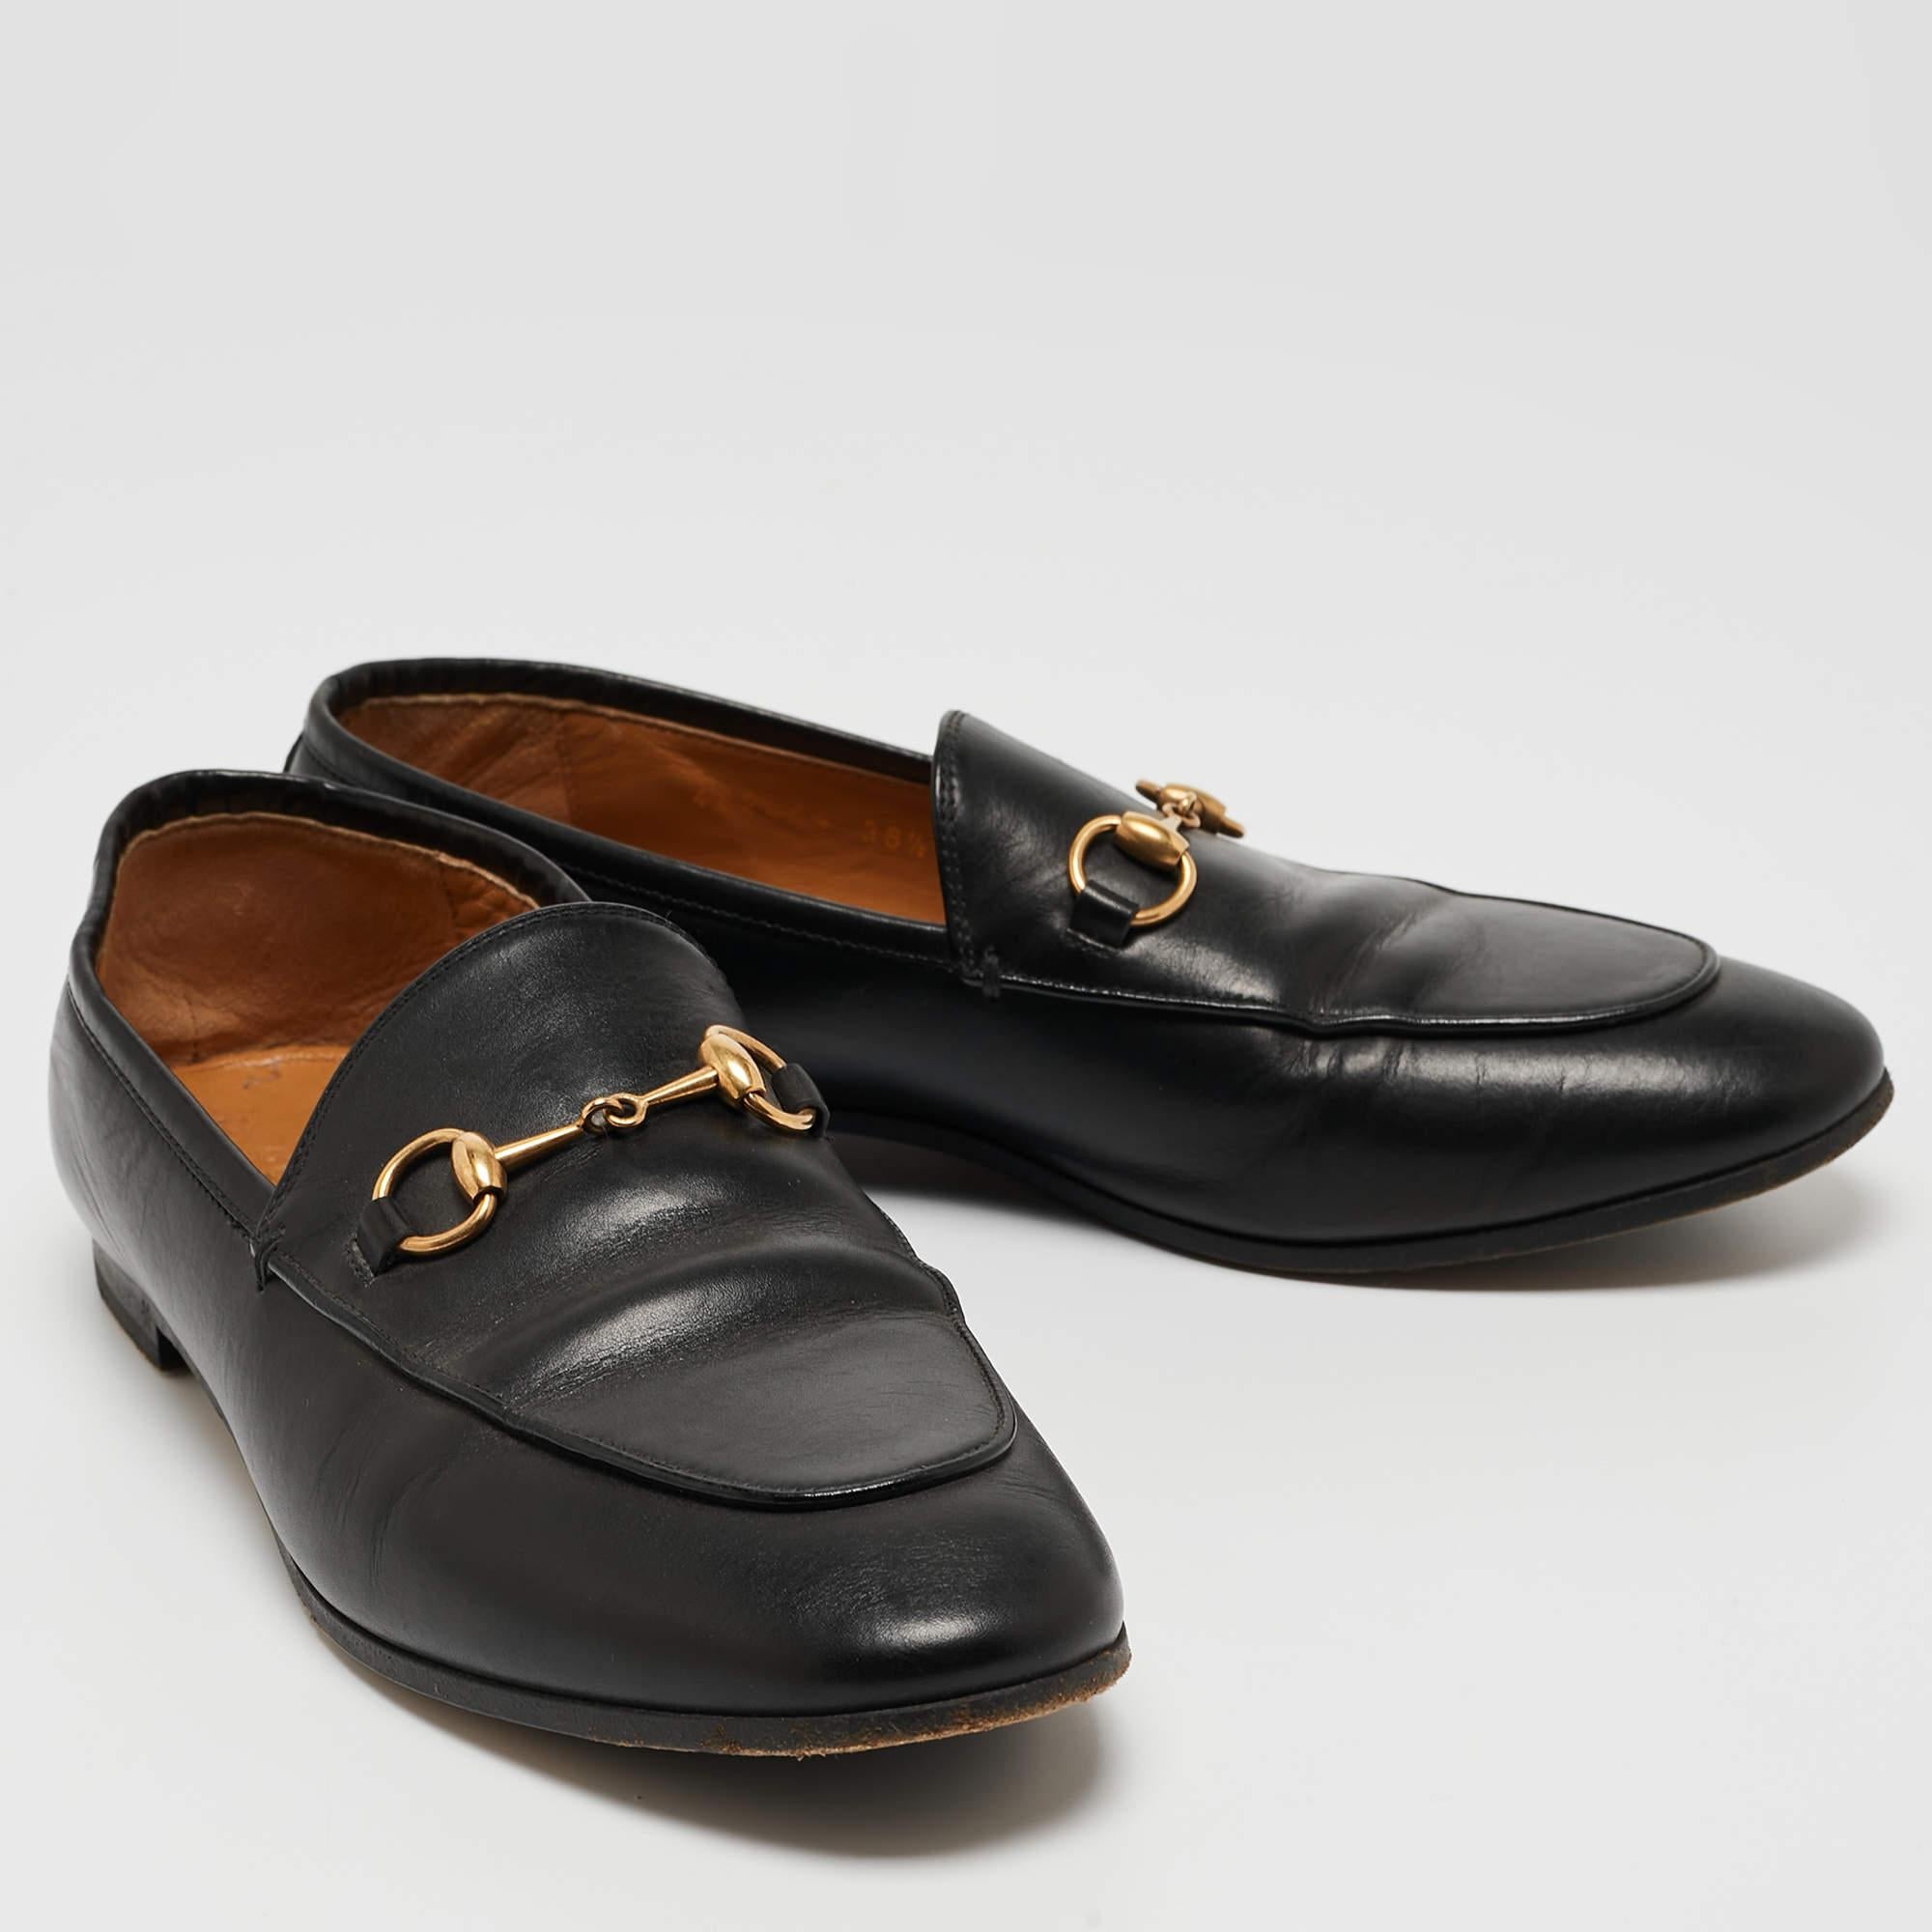 Gucci Black Leather Jordaan Loafers Size 38.5 3